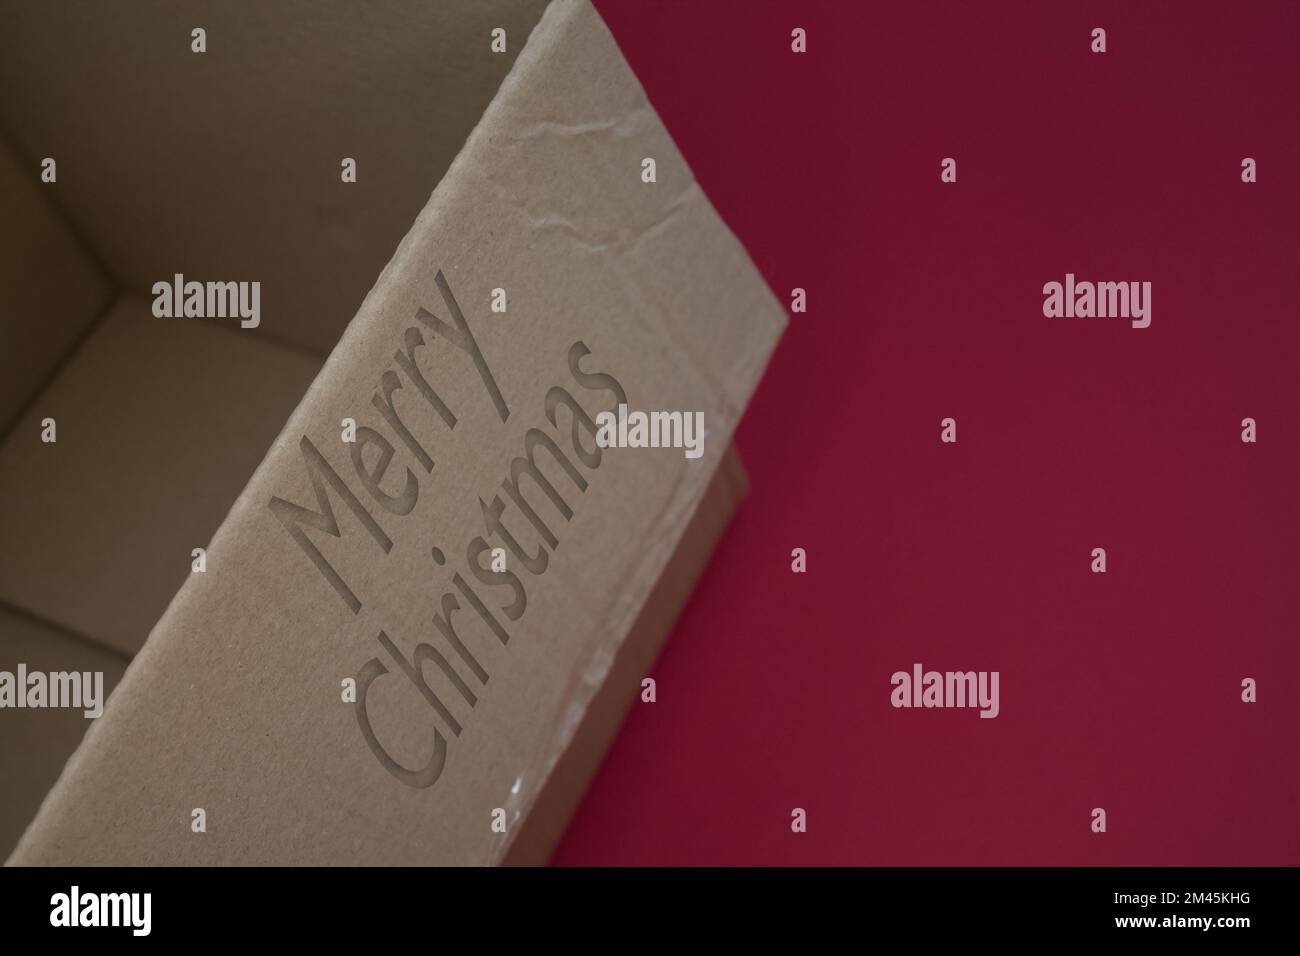 Merry Christmas word with cardboard box. Brown folded card box. Stock Photo